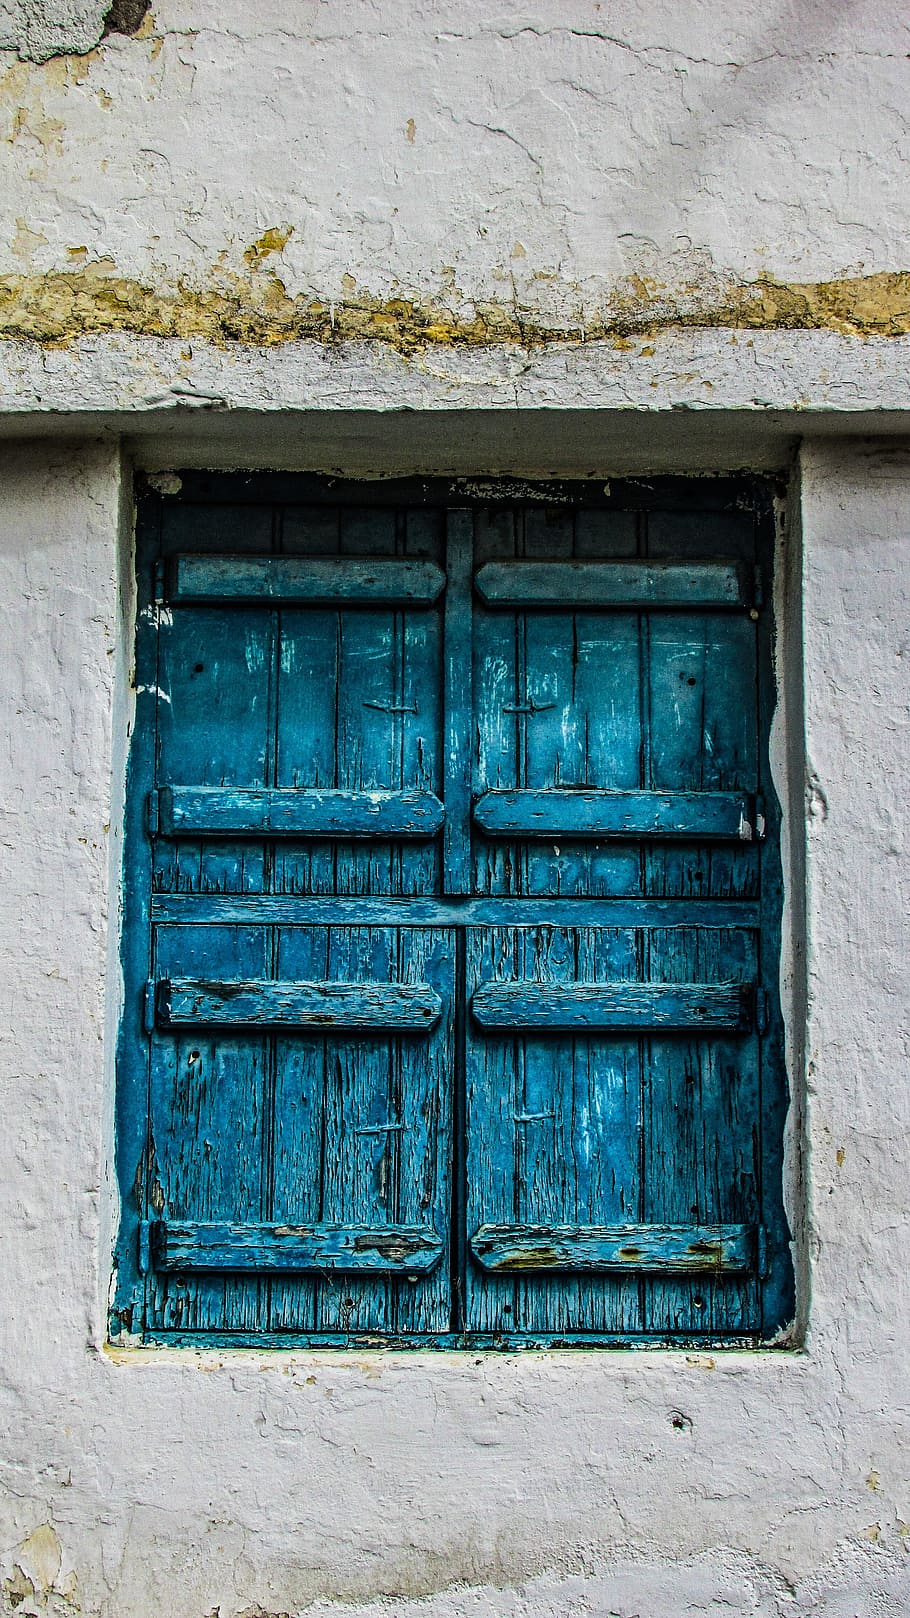 Cyprus, Paralimni, Old House, Window, blue, architecture, aged, weathered, wooden, old